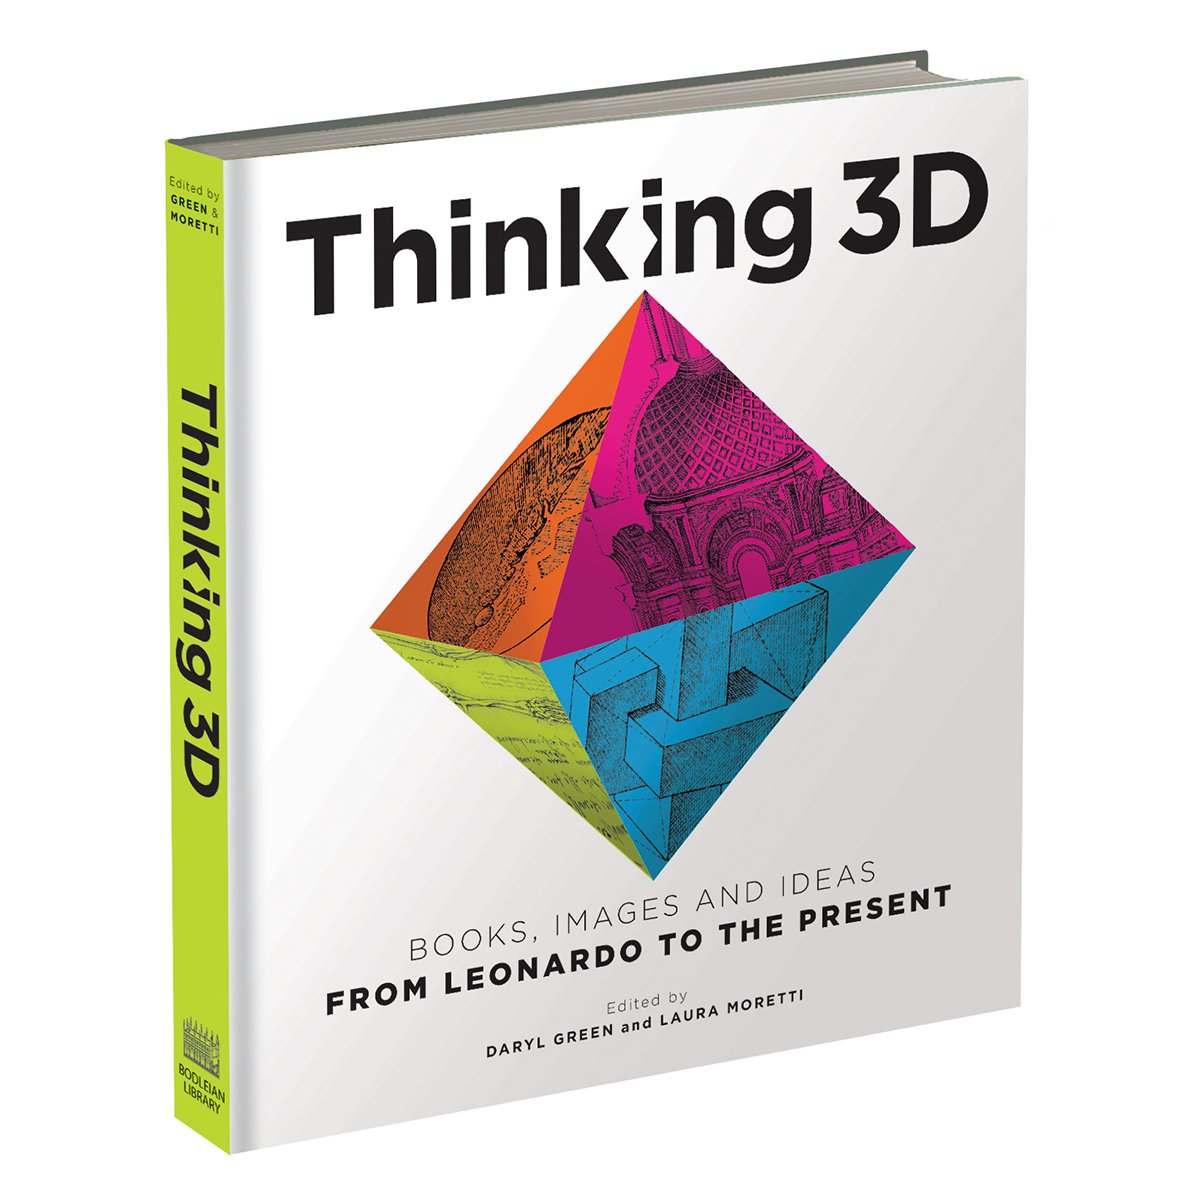 Thinking 3D. Books, Images and Ideas from Leonardo to the Present